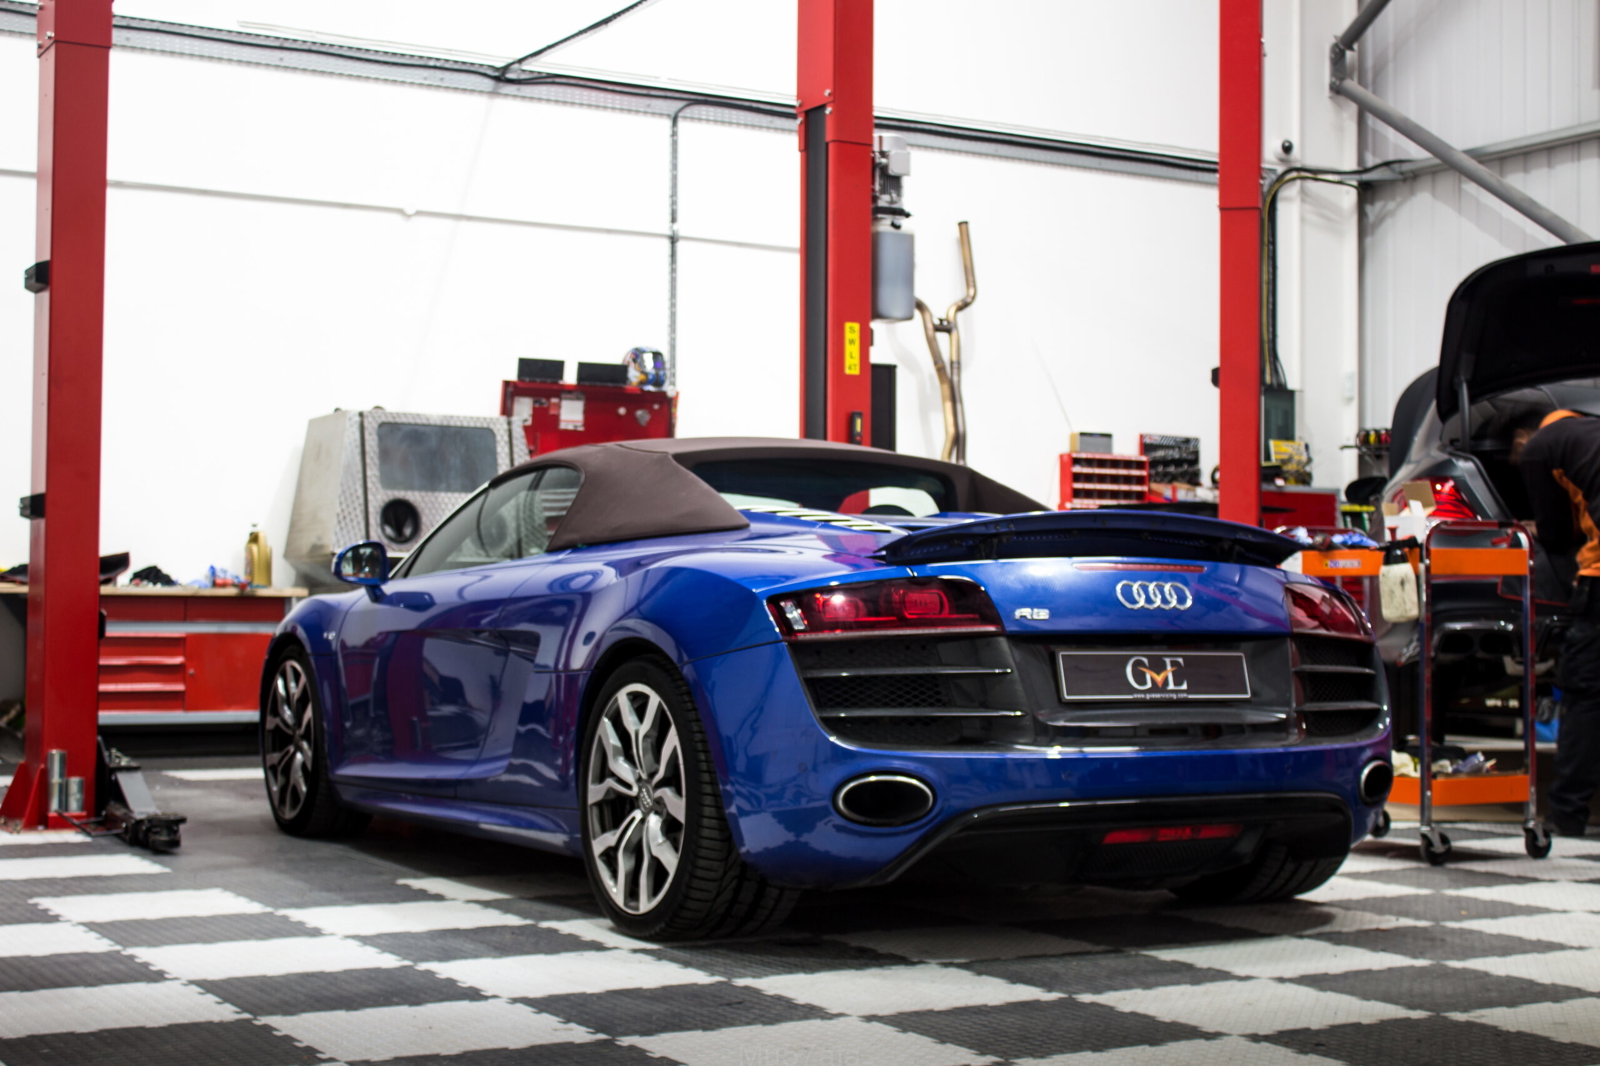 Suspension Systems for Audi R8